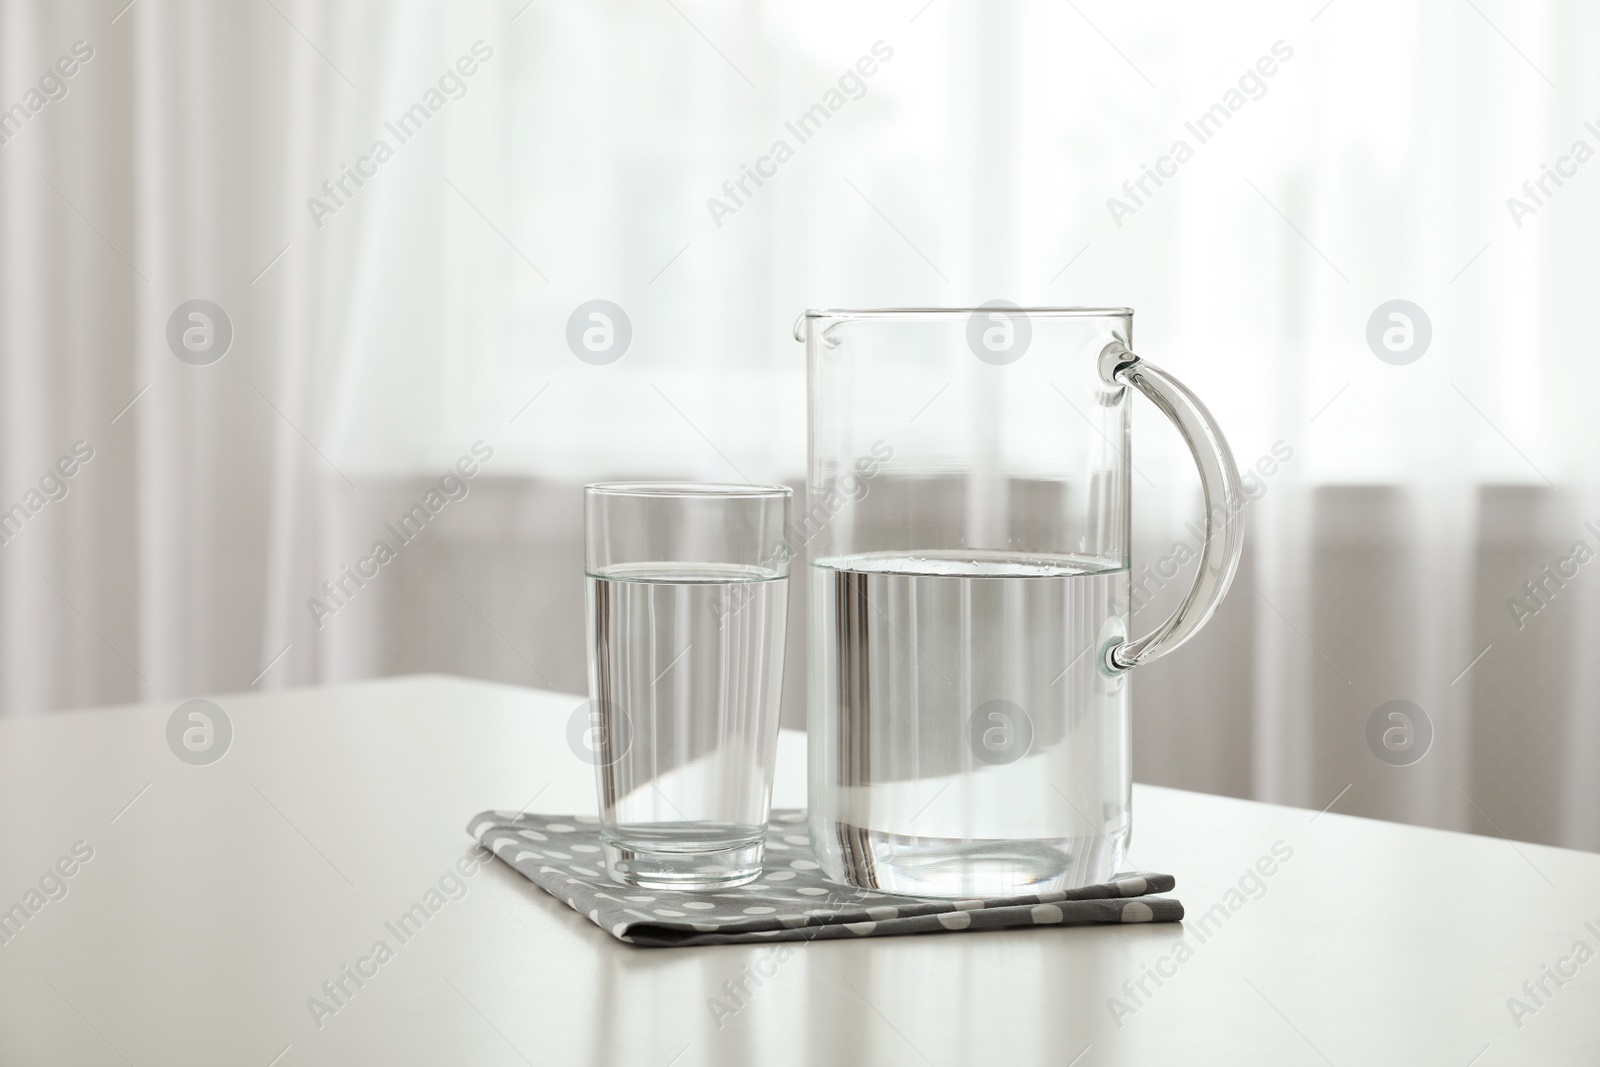 Photo of Glassware of fresh water on table indoors